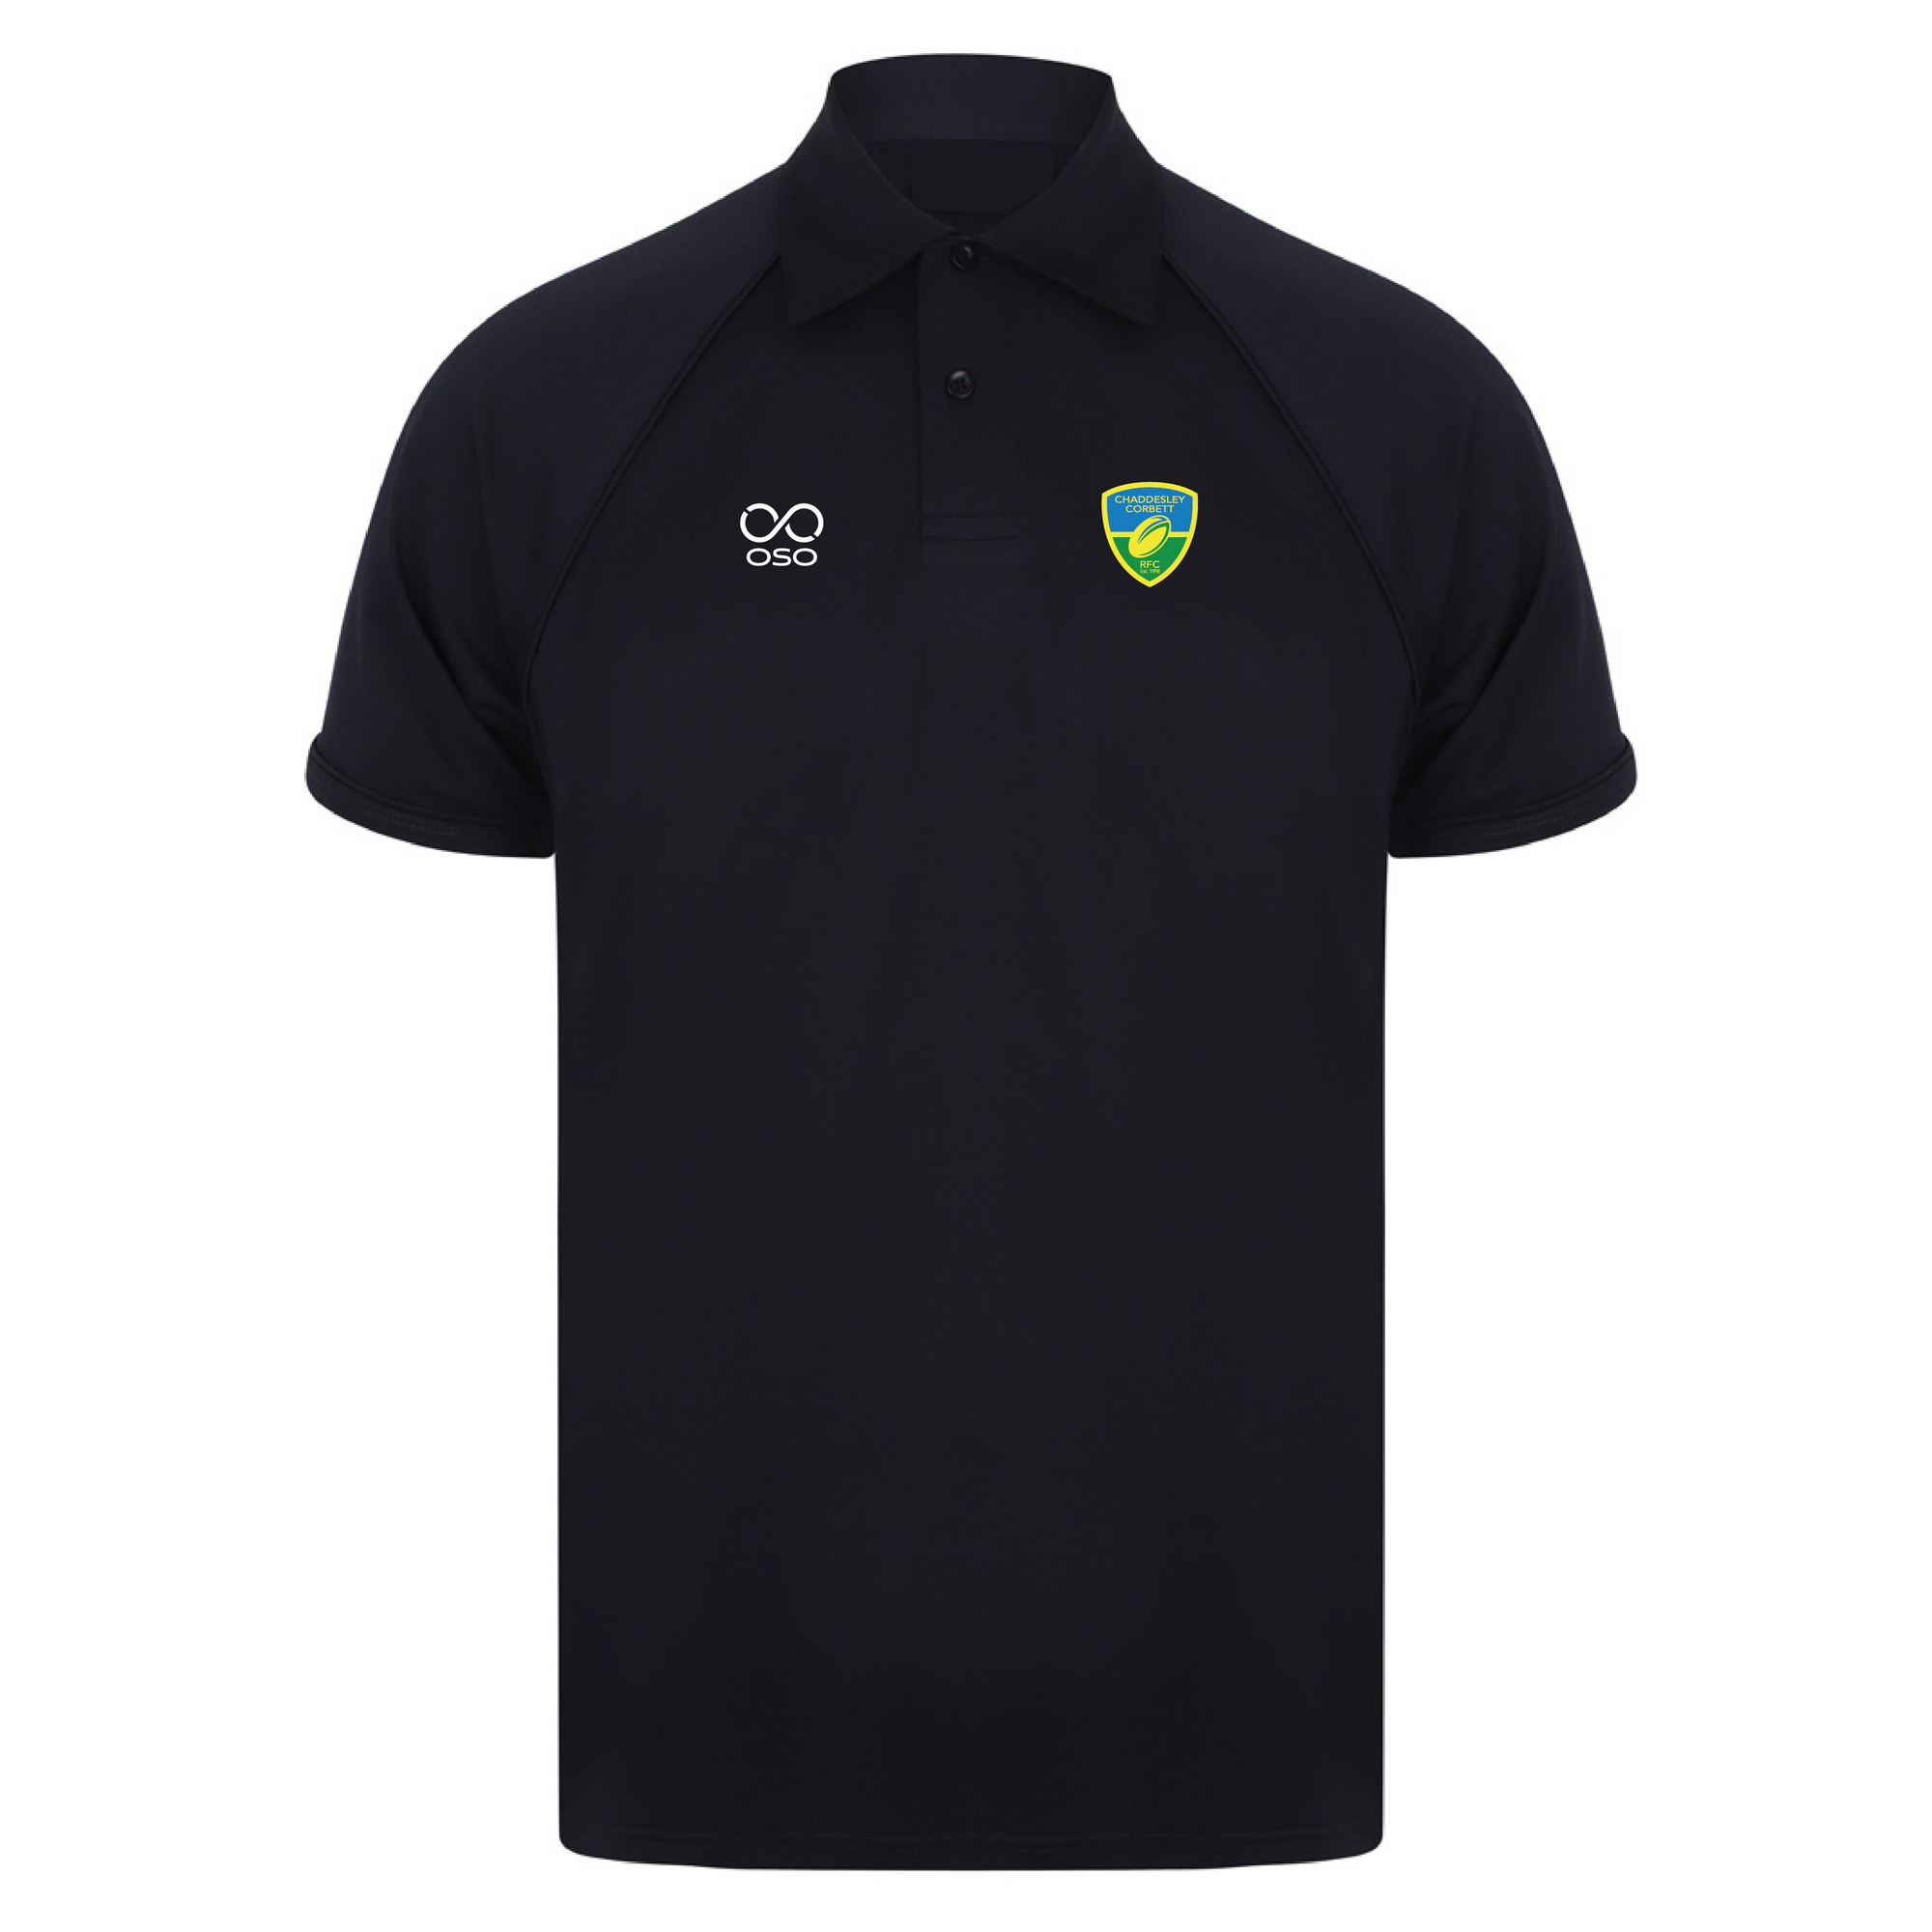 CCRFC Polo Ladies - Navy/navy